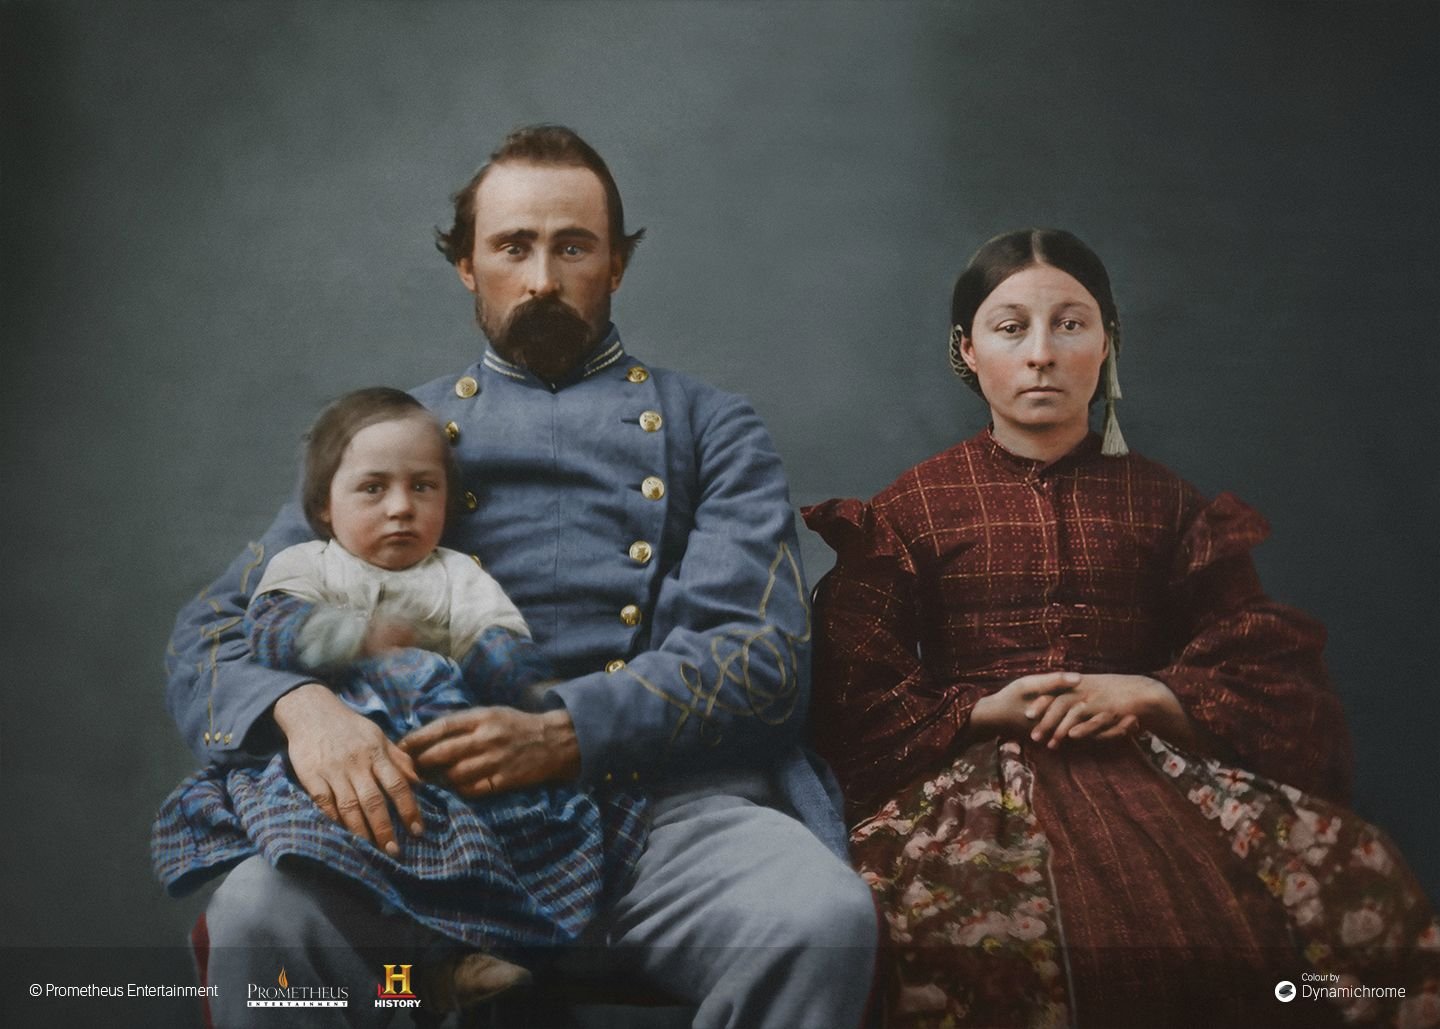 Confederate soldier takes time out for a family portrait.